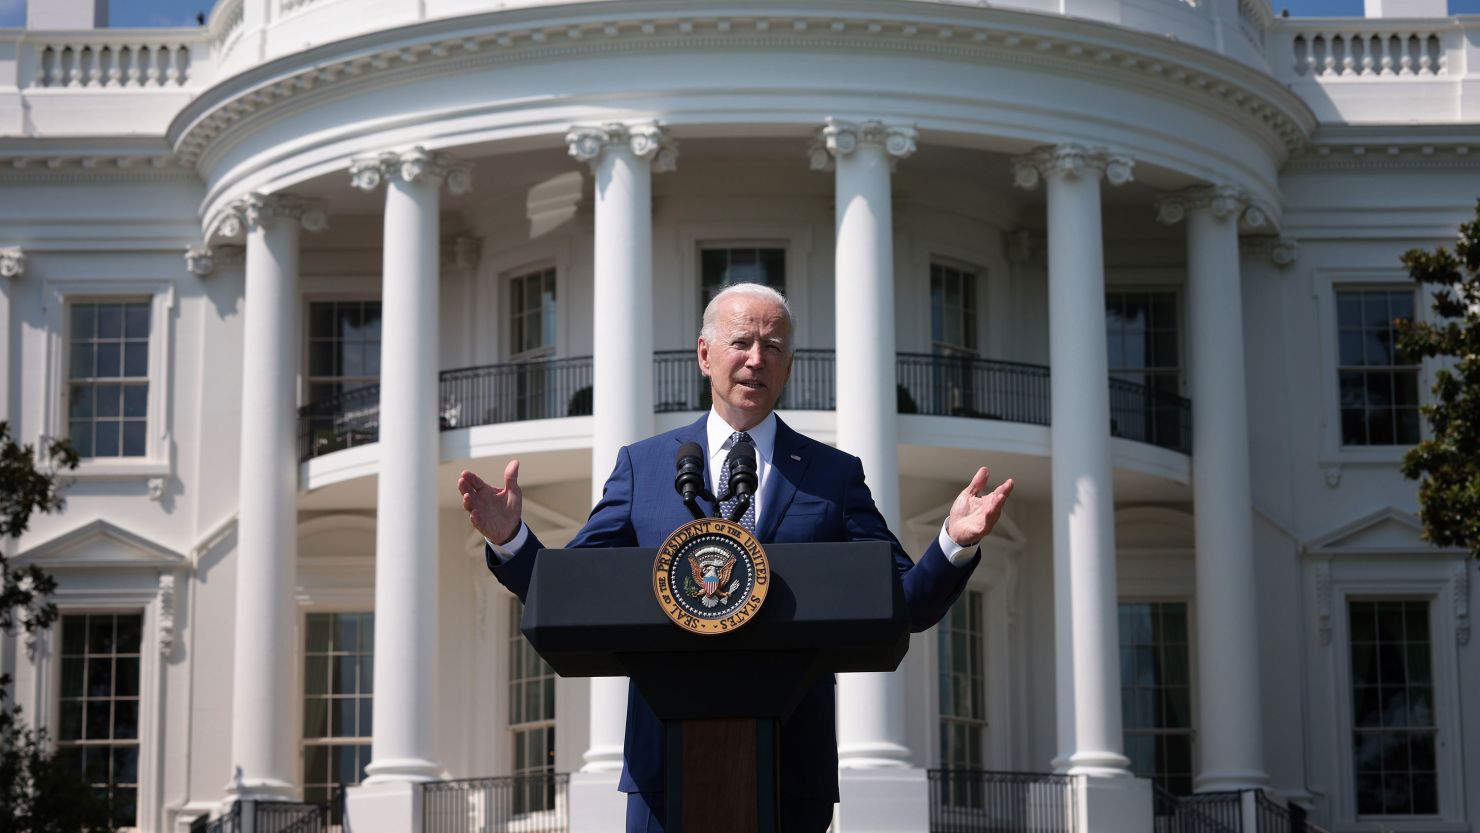 President Joe Biden delivers remarks during an event on the South Lawn of the White House in August 2021 in Washington, DC. 